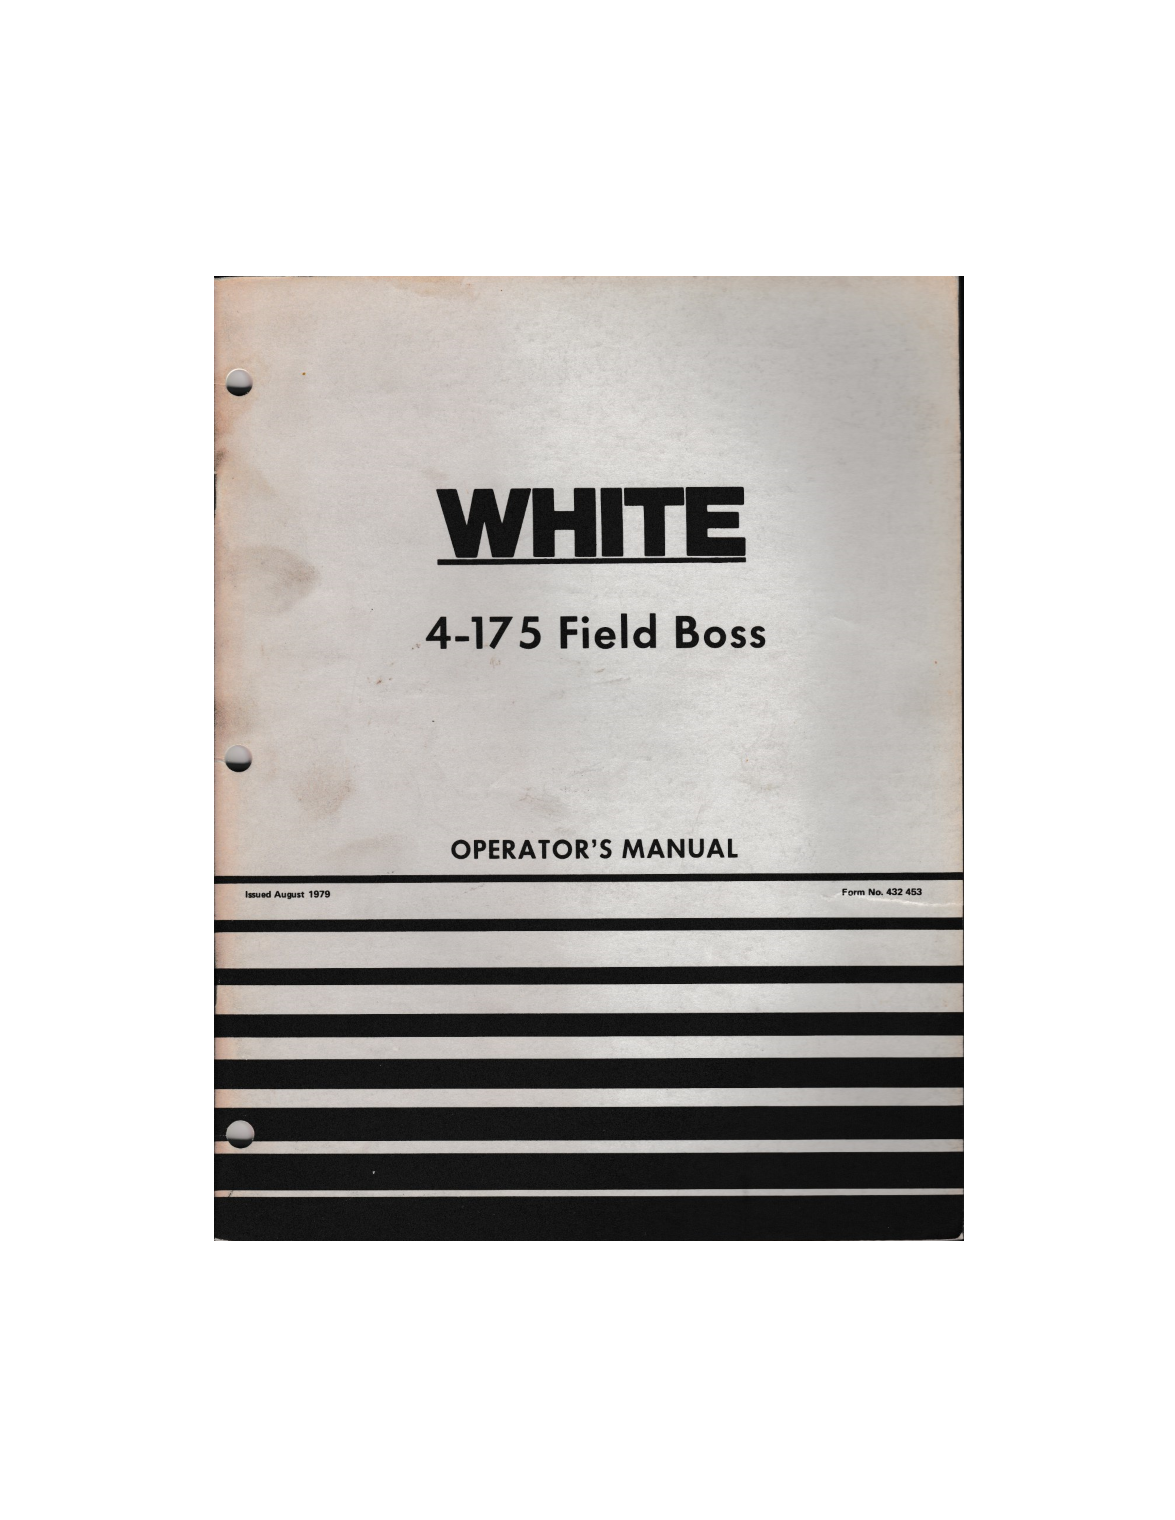 White 4-175 Field Boss Tractor Operator's Manual » Flynn's Tractor ...